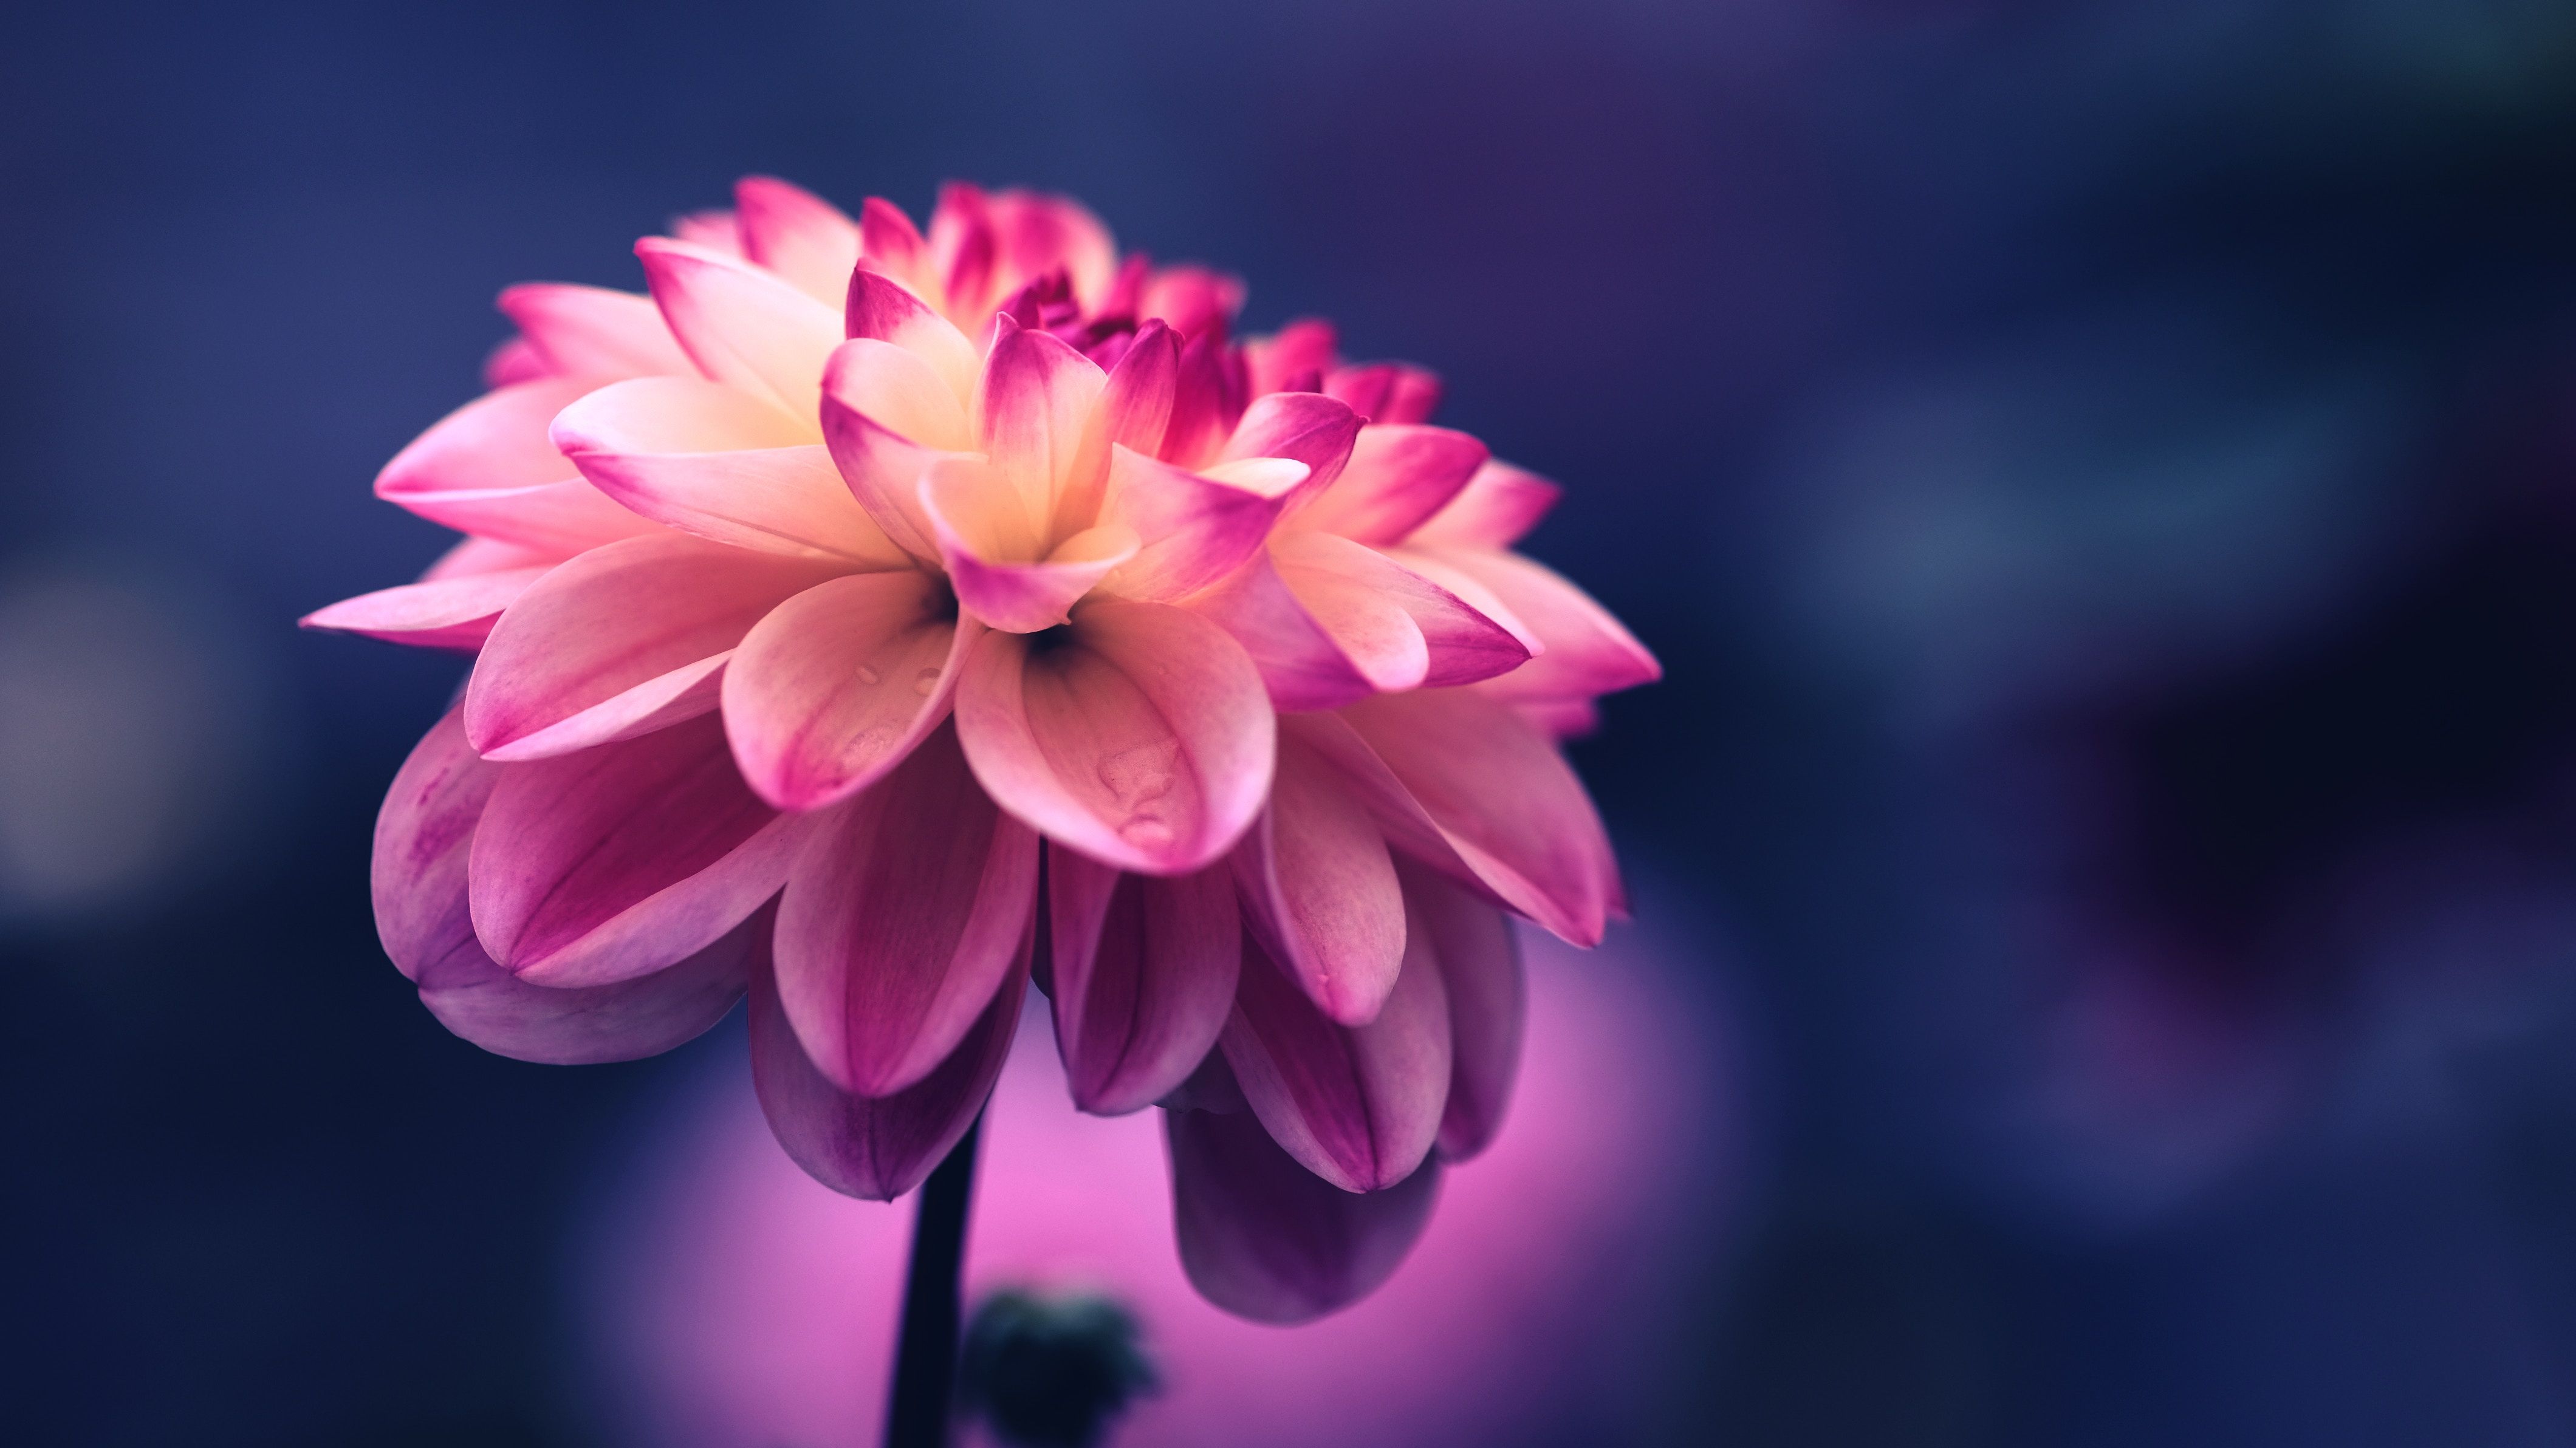 4240x2384 #colorful, #nature, #tumblr, #wallpaper, #flower